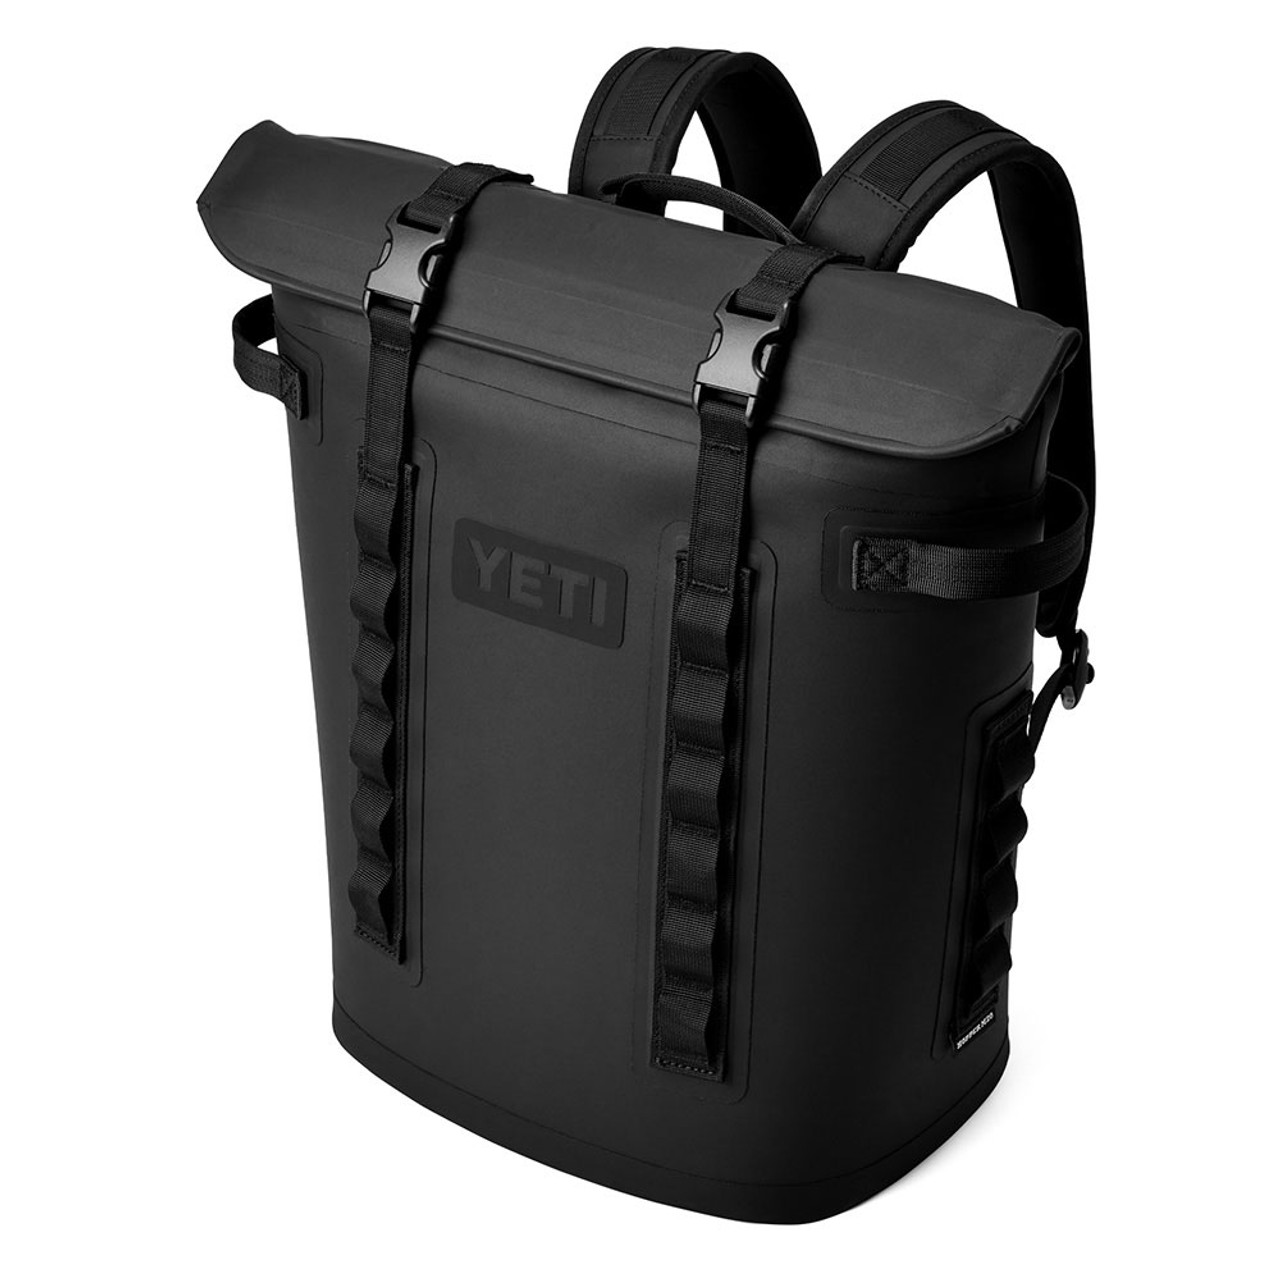 https://cdn11.bigcommerce.com/s-zut1msomd6/images/stencil/1280x1280/products/40633/242500/yeti-hopper-m20-backpack-cooler-18060131272-all-black-closed__89189.1698787104.jpg?c=1